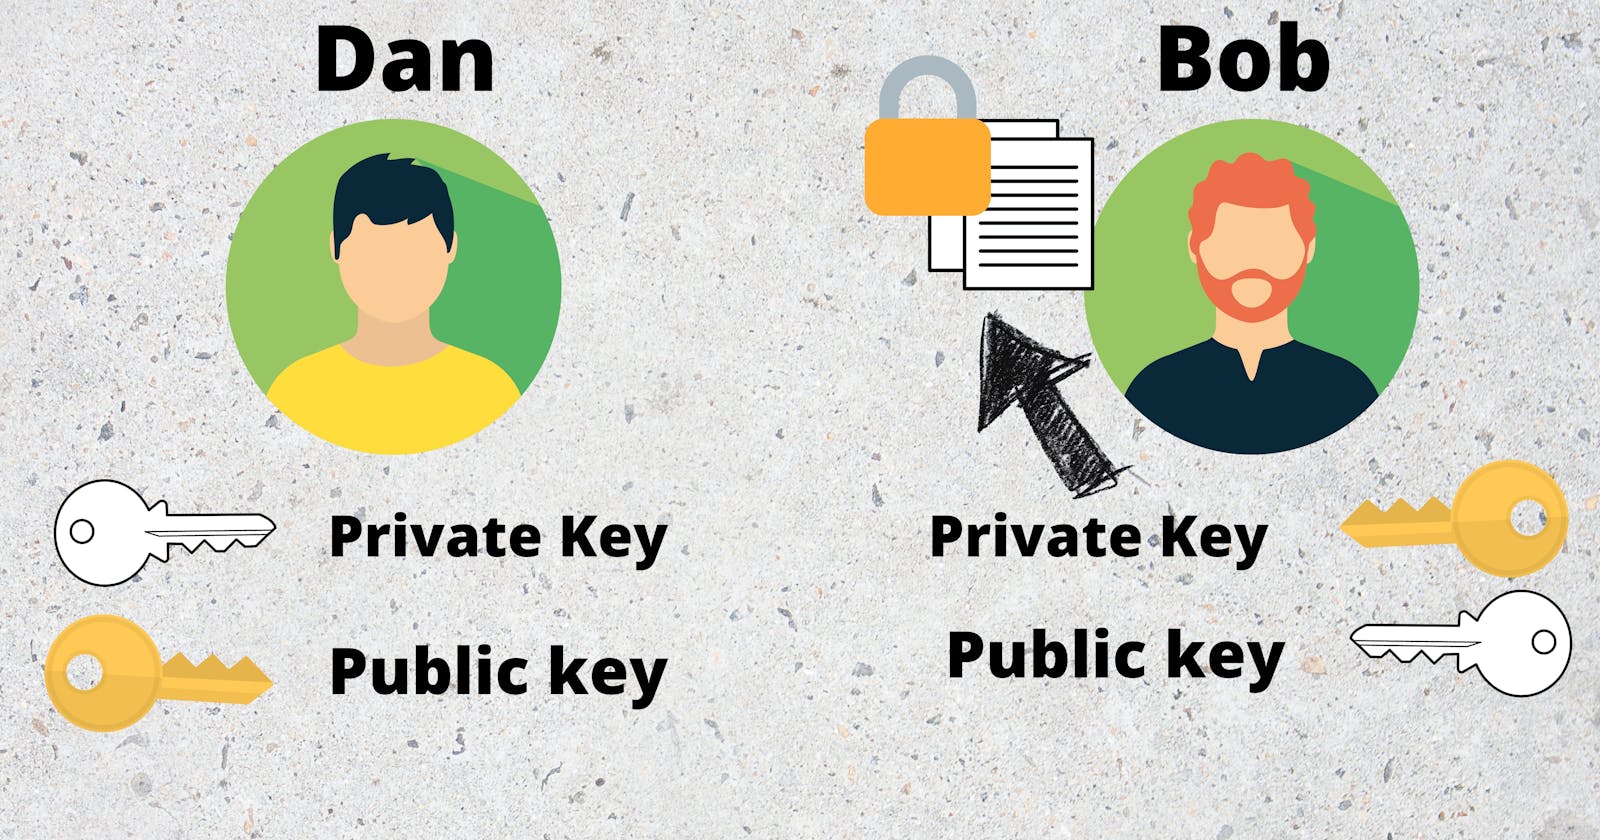 How do Public and Private keys work?